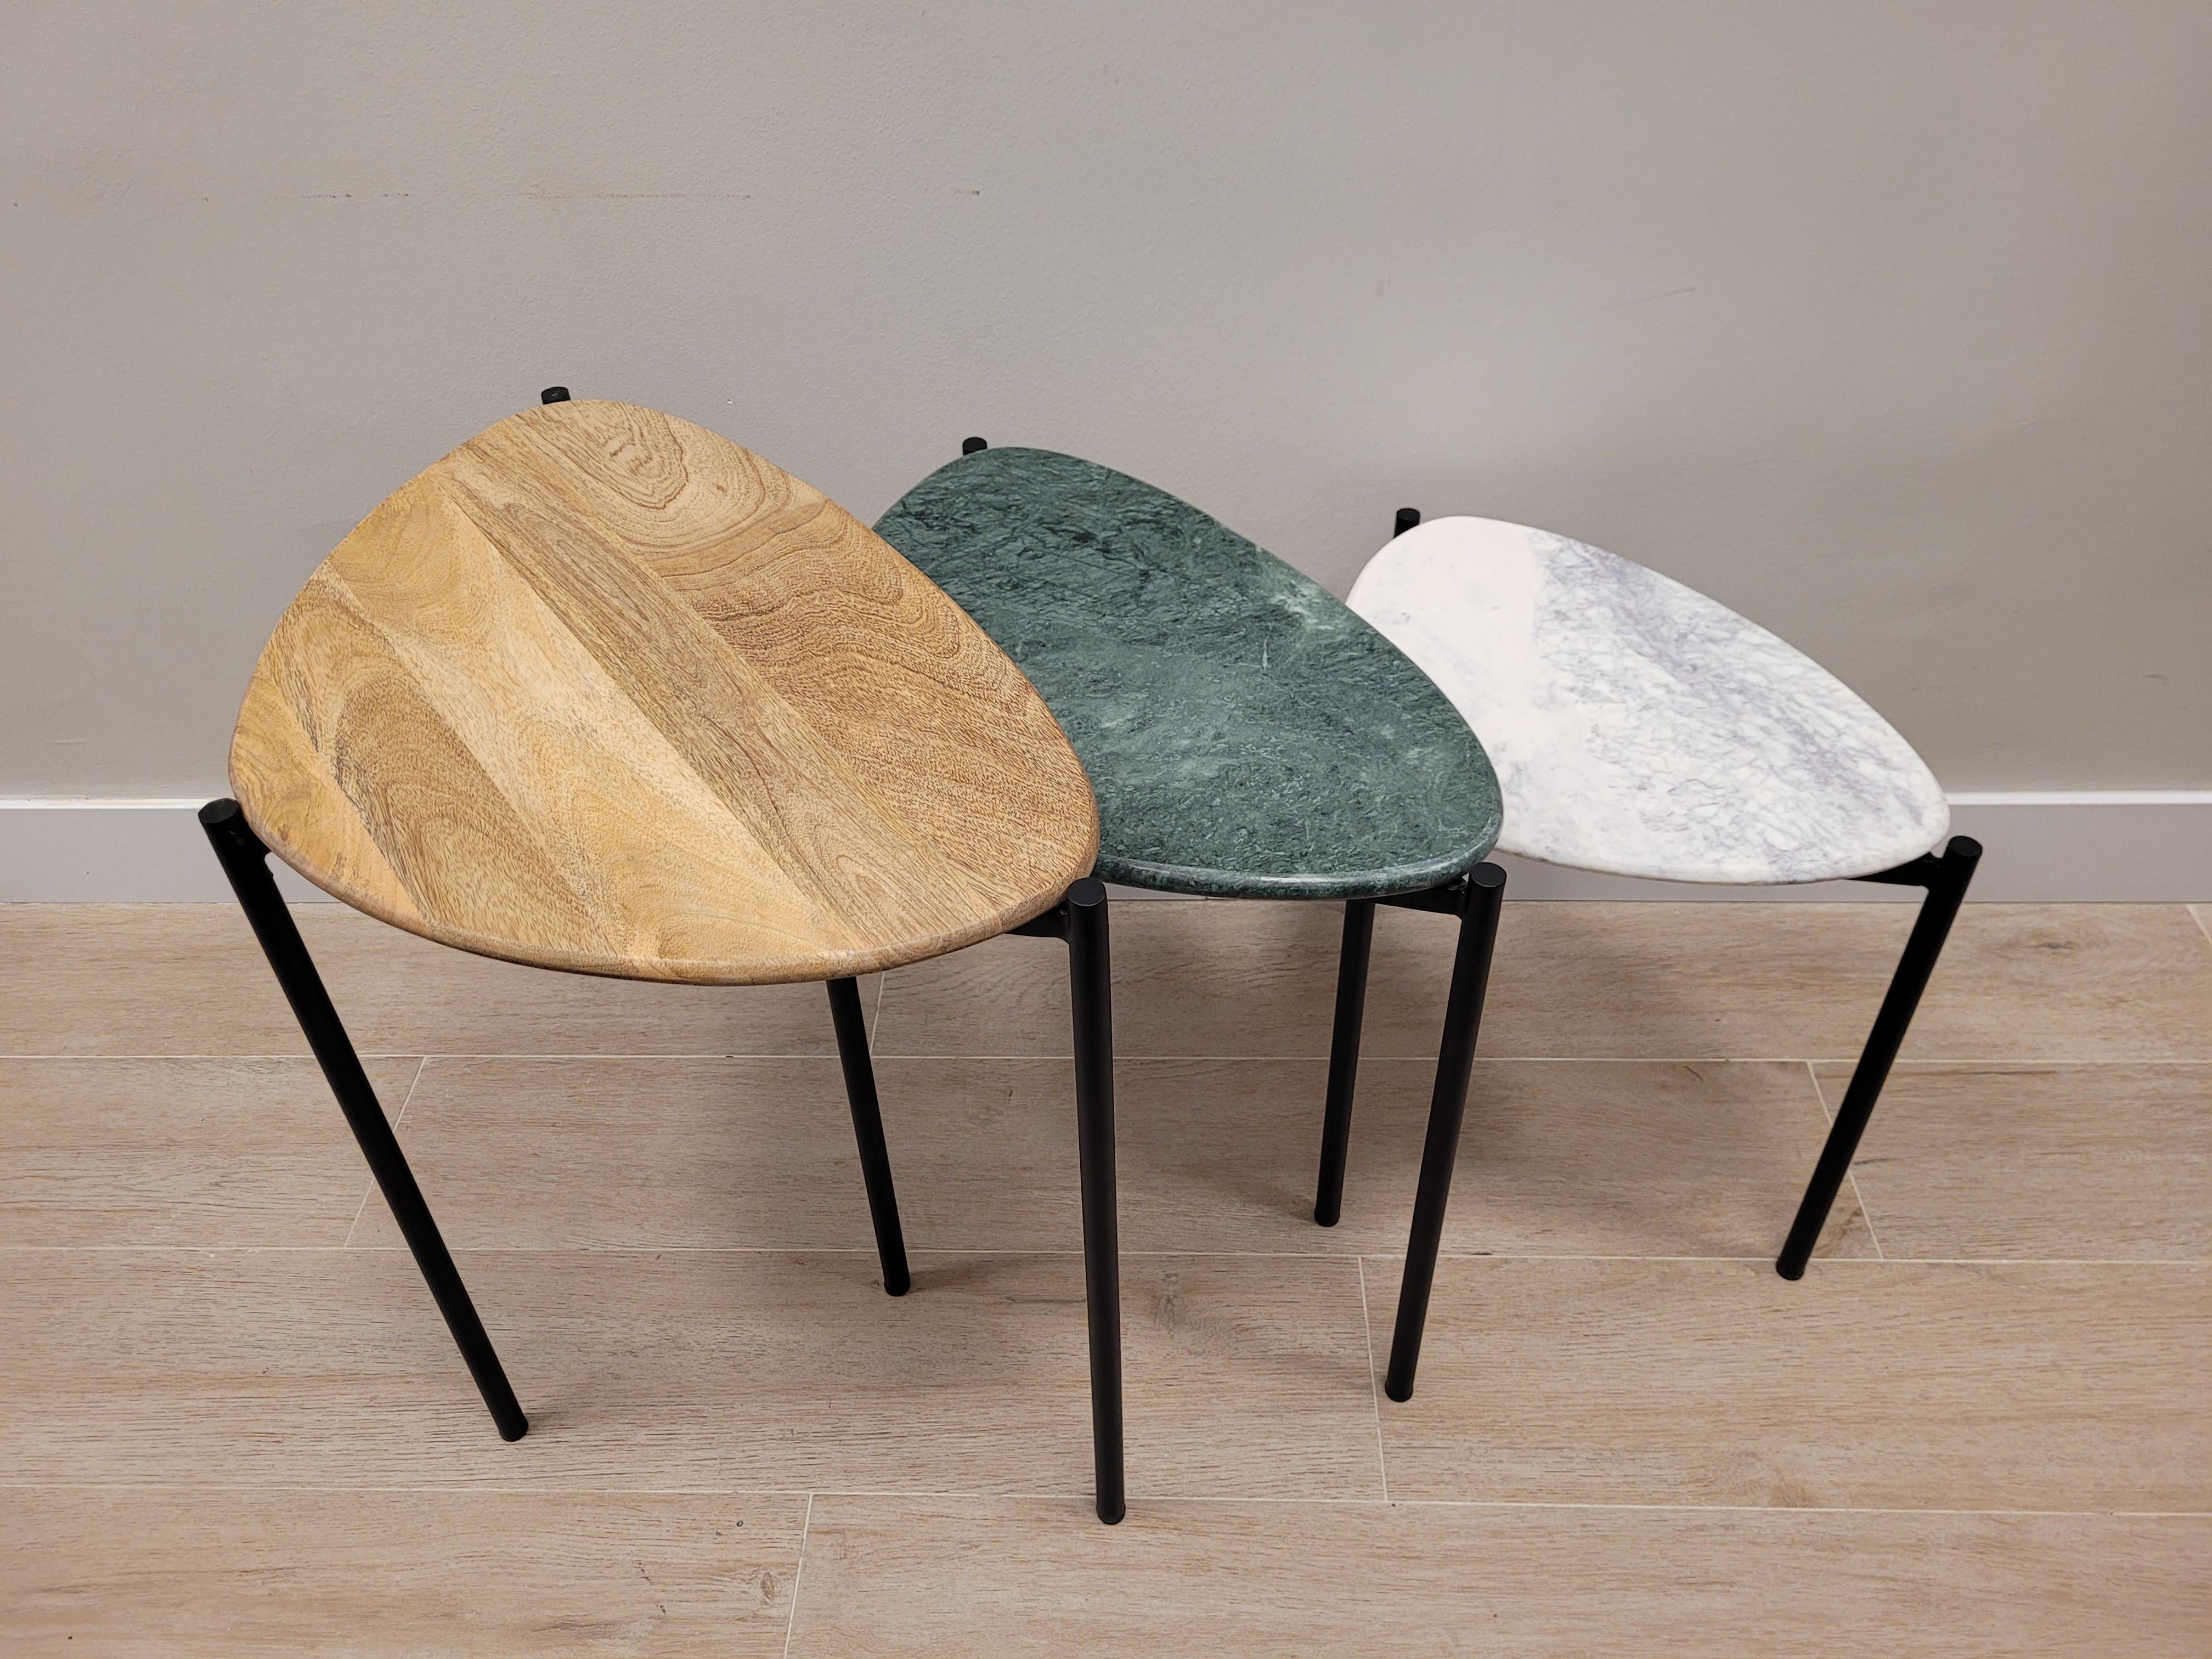 Hand-Crafted Set of 3 End-Tables Green, White Marble and Wood 21st Century, Side Table